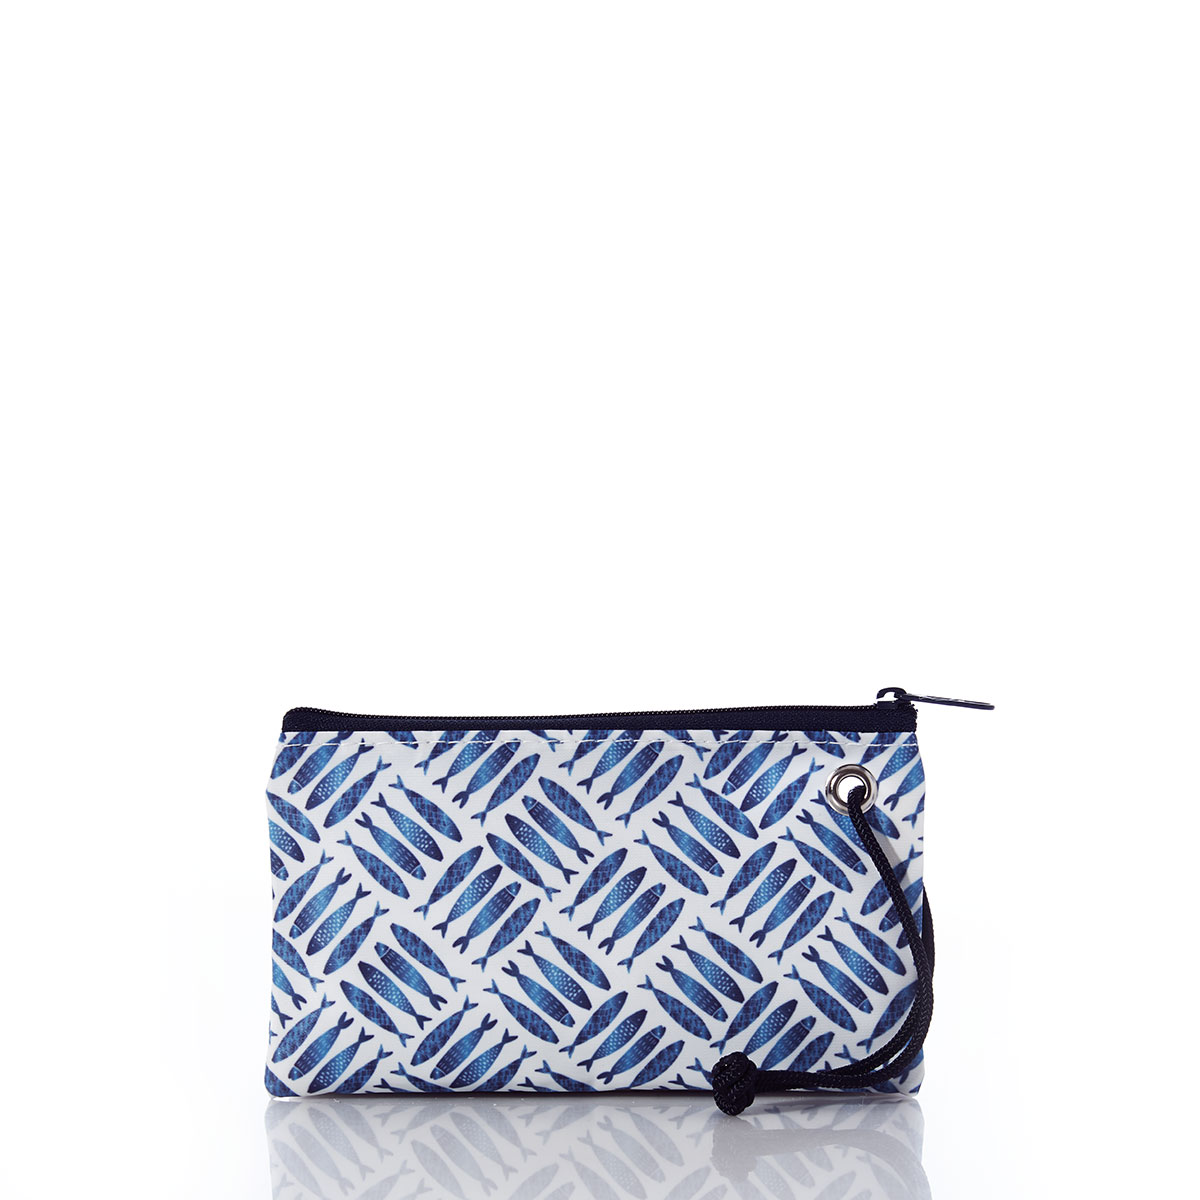 criss cross print of blue school of fish on recycled sail cloth wristlet with navy zipper and wristlet strap